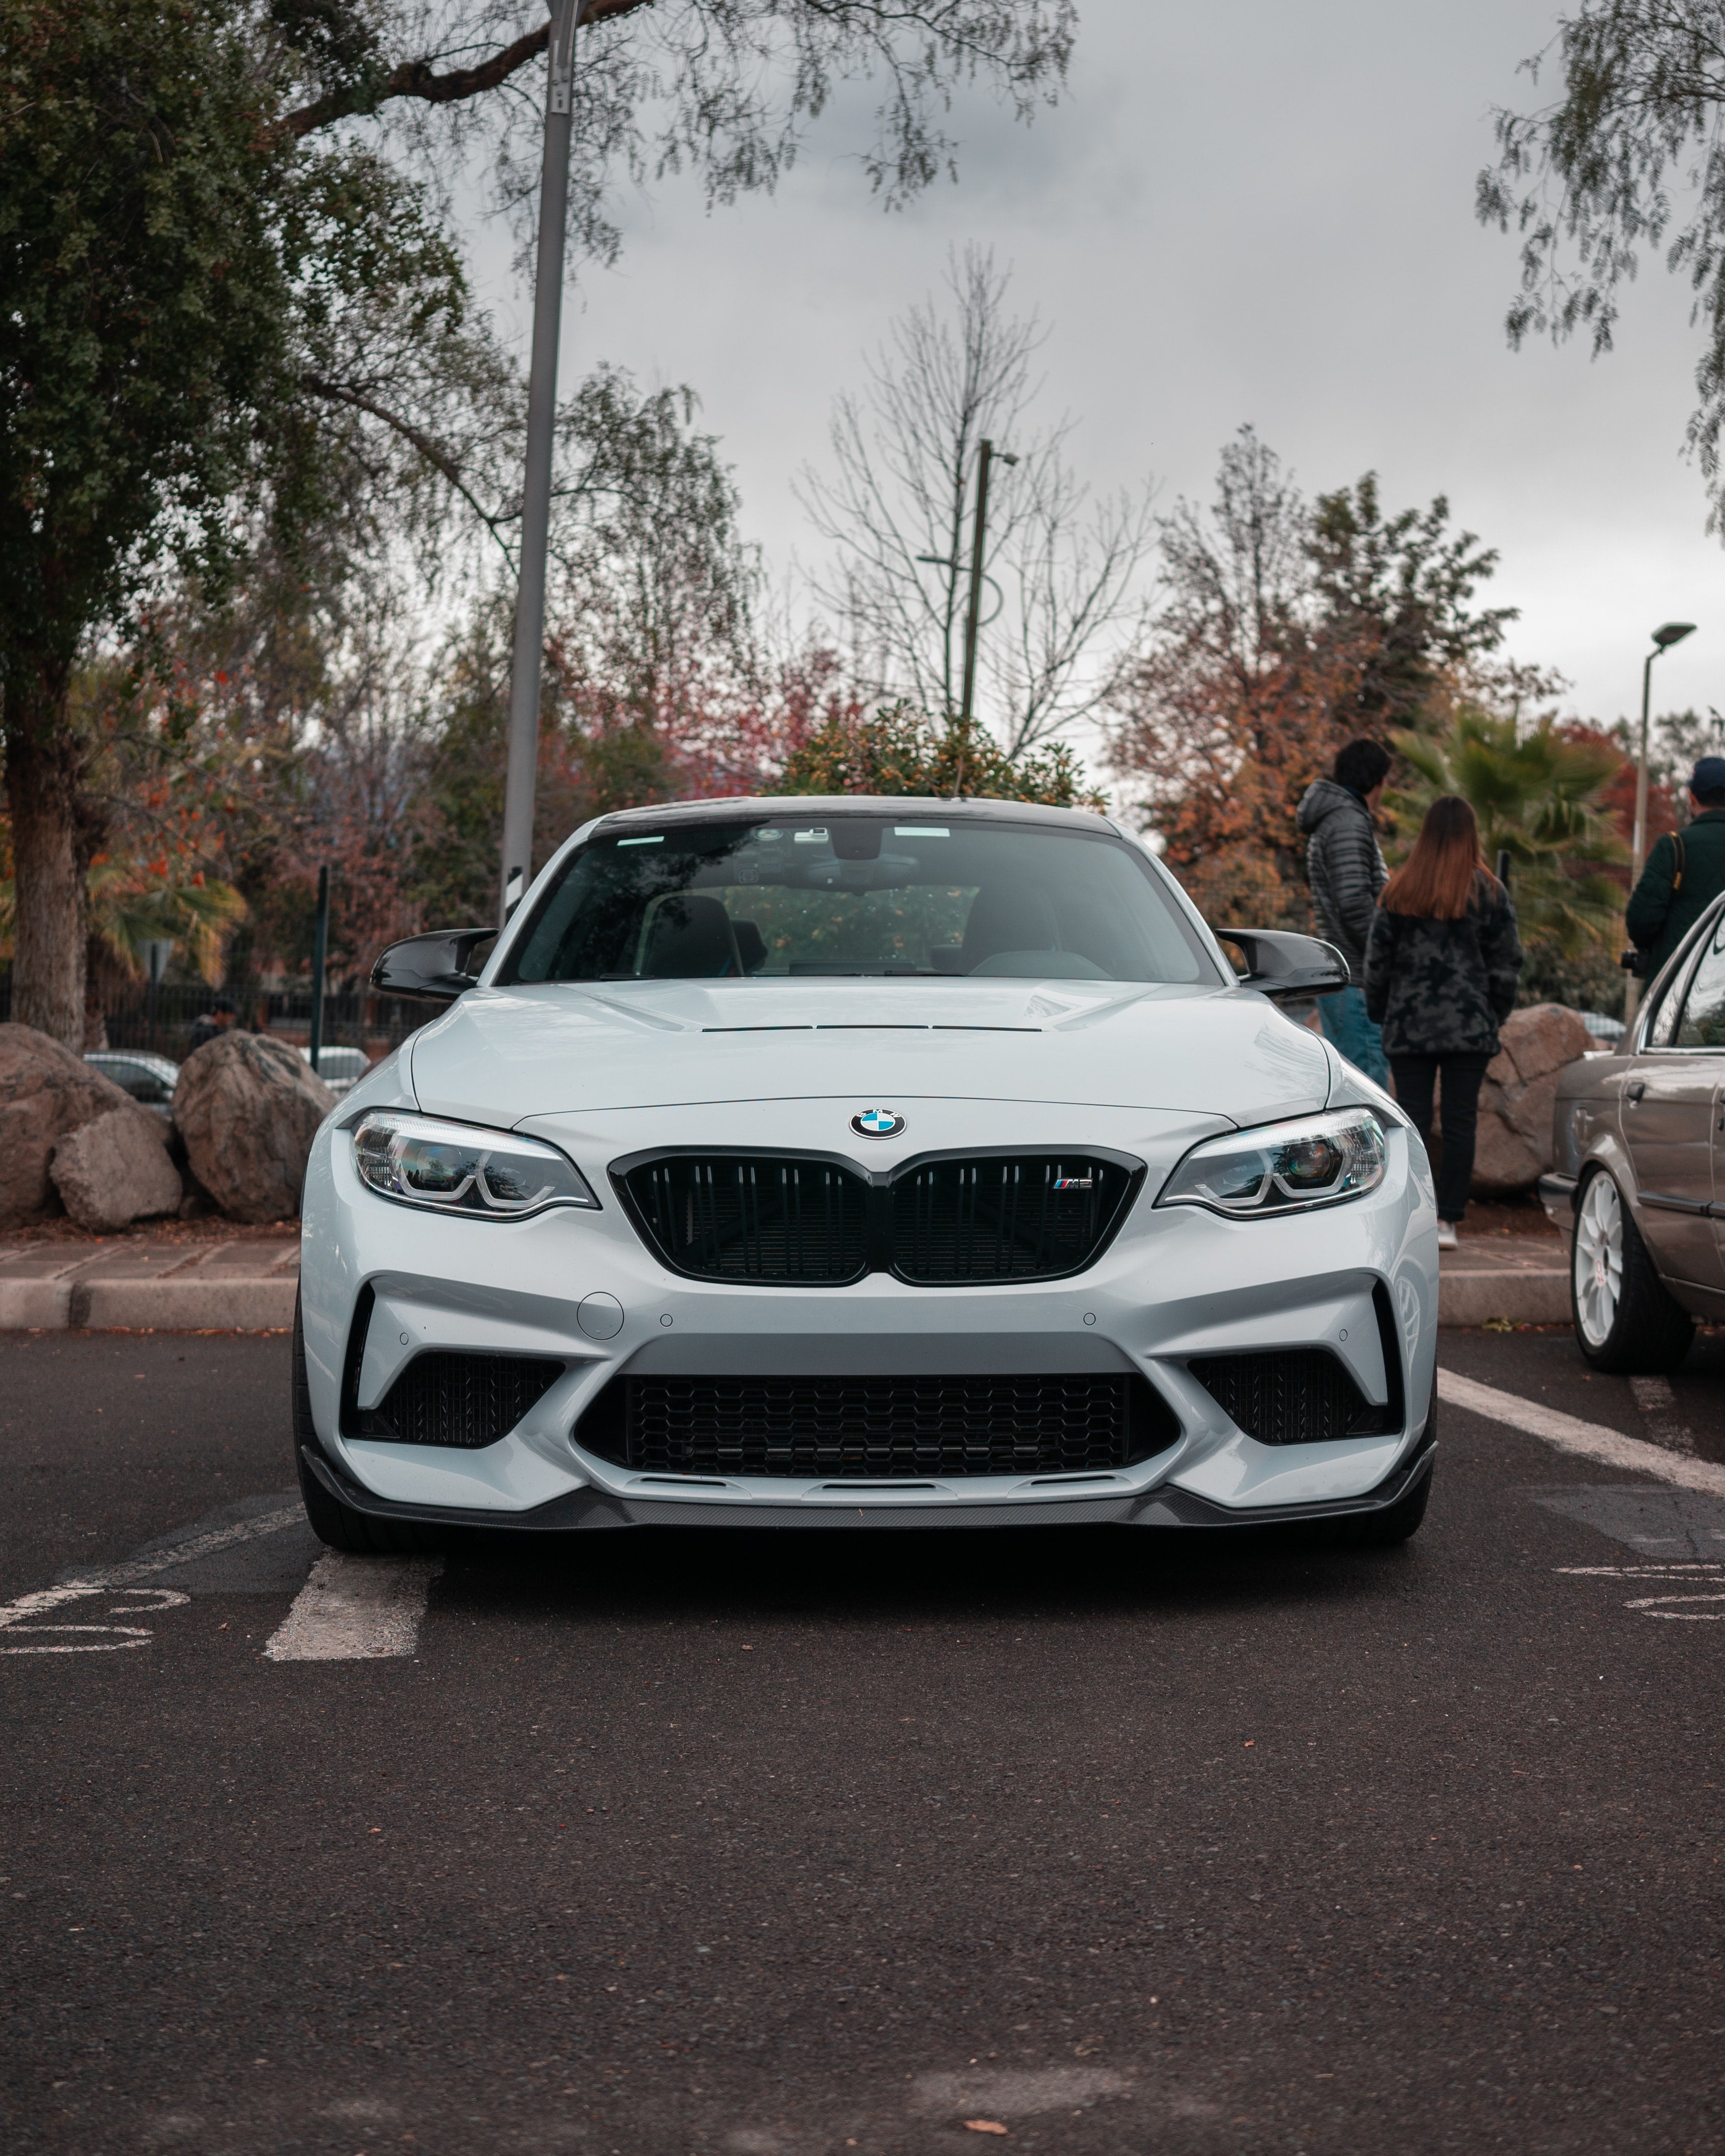 BMW F87 M2 in Hockenheim Silver Metallic color parked on the street showcasing its sleek body design and sporty stance